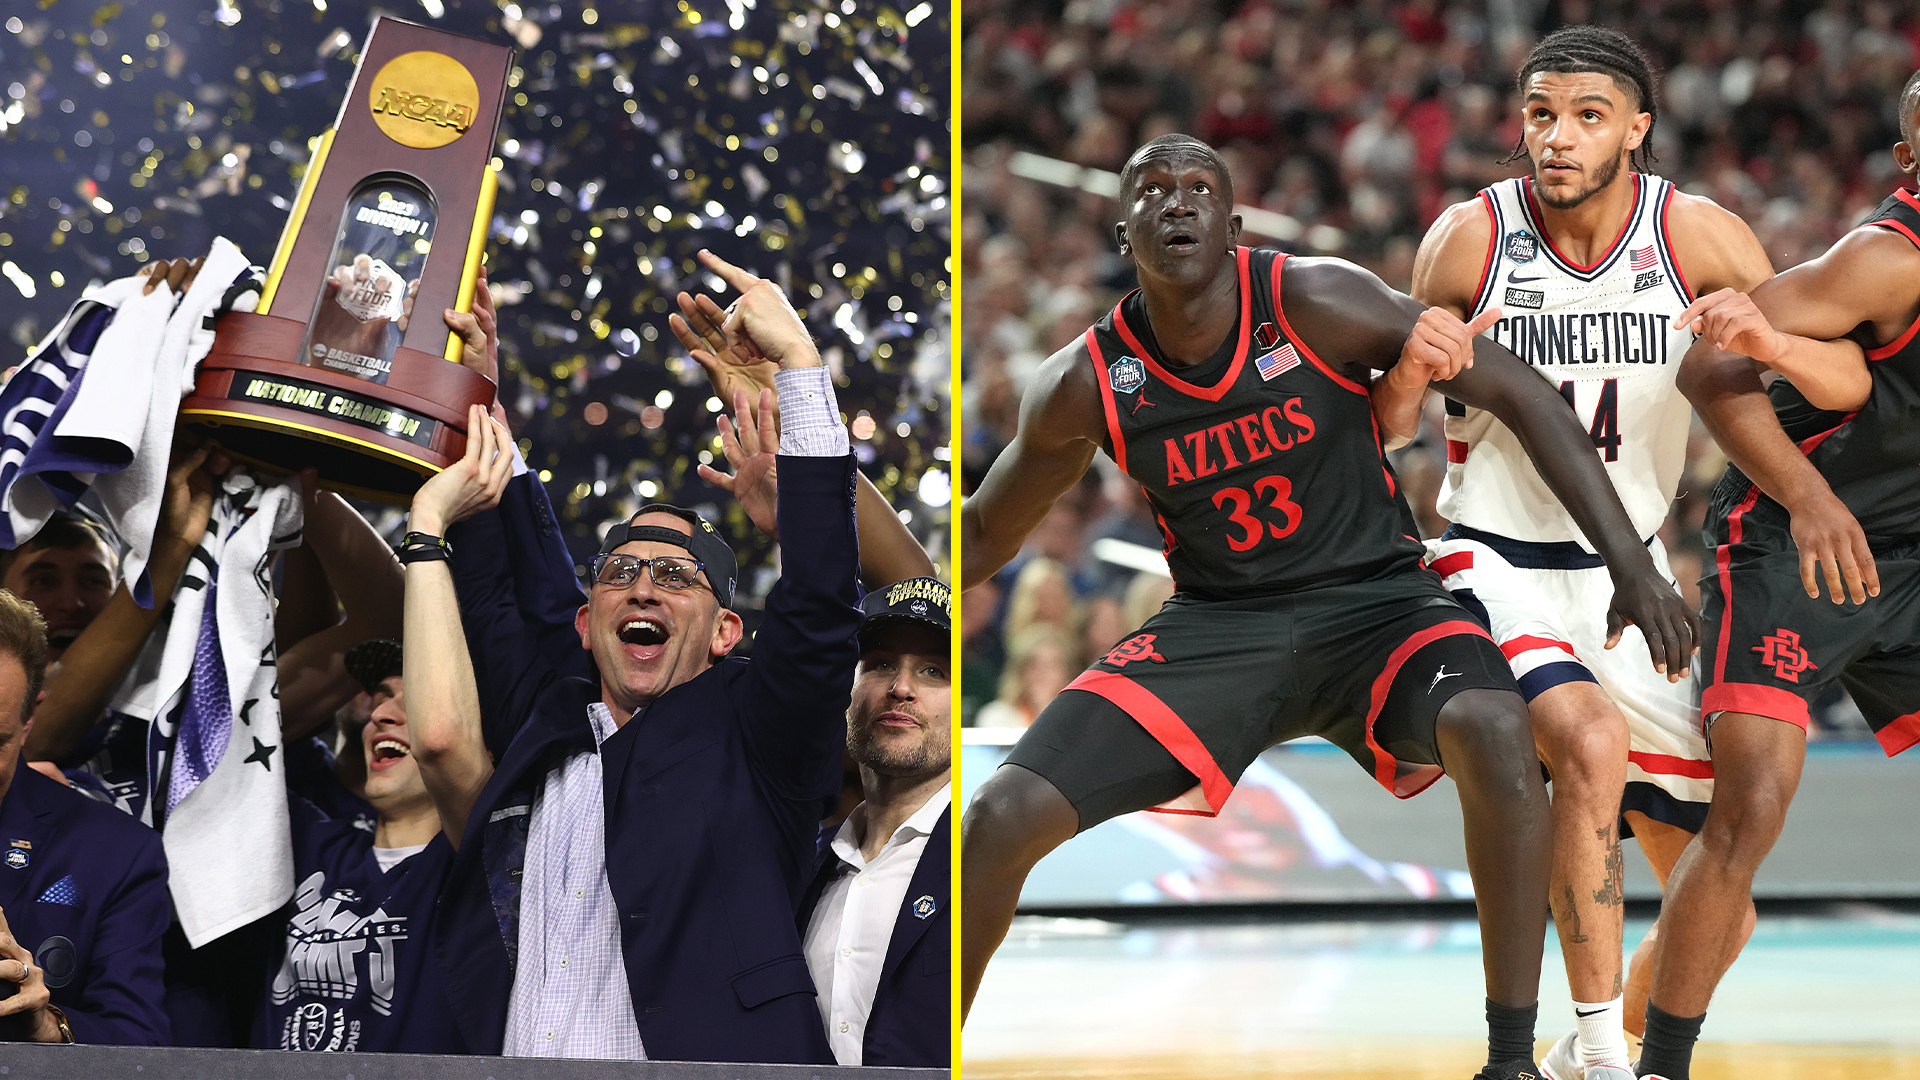 Fans put March Madness level with the Super Bowl as bets in the tens of billions are made on NCAA tournament